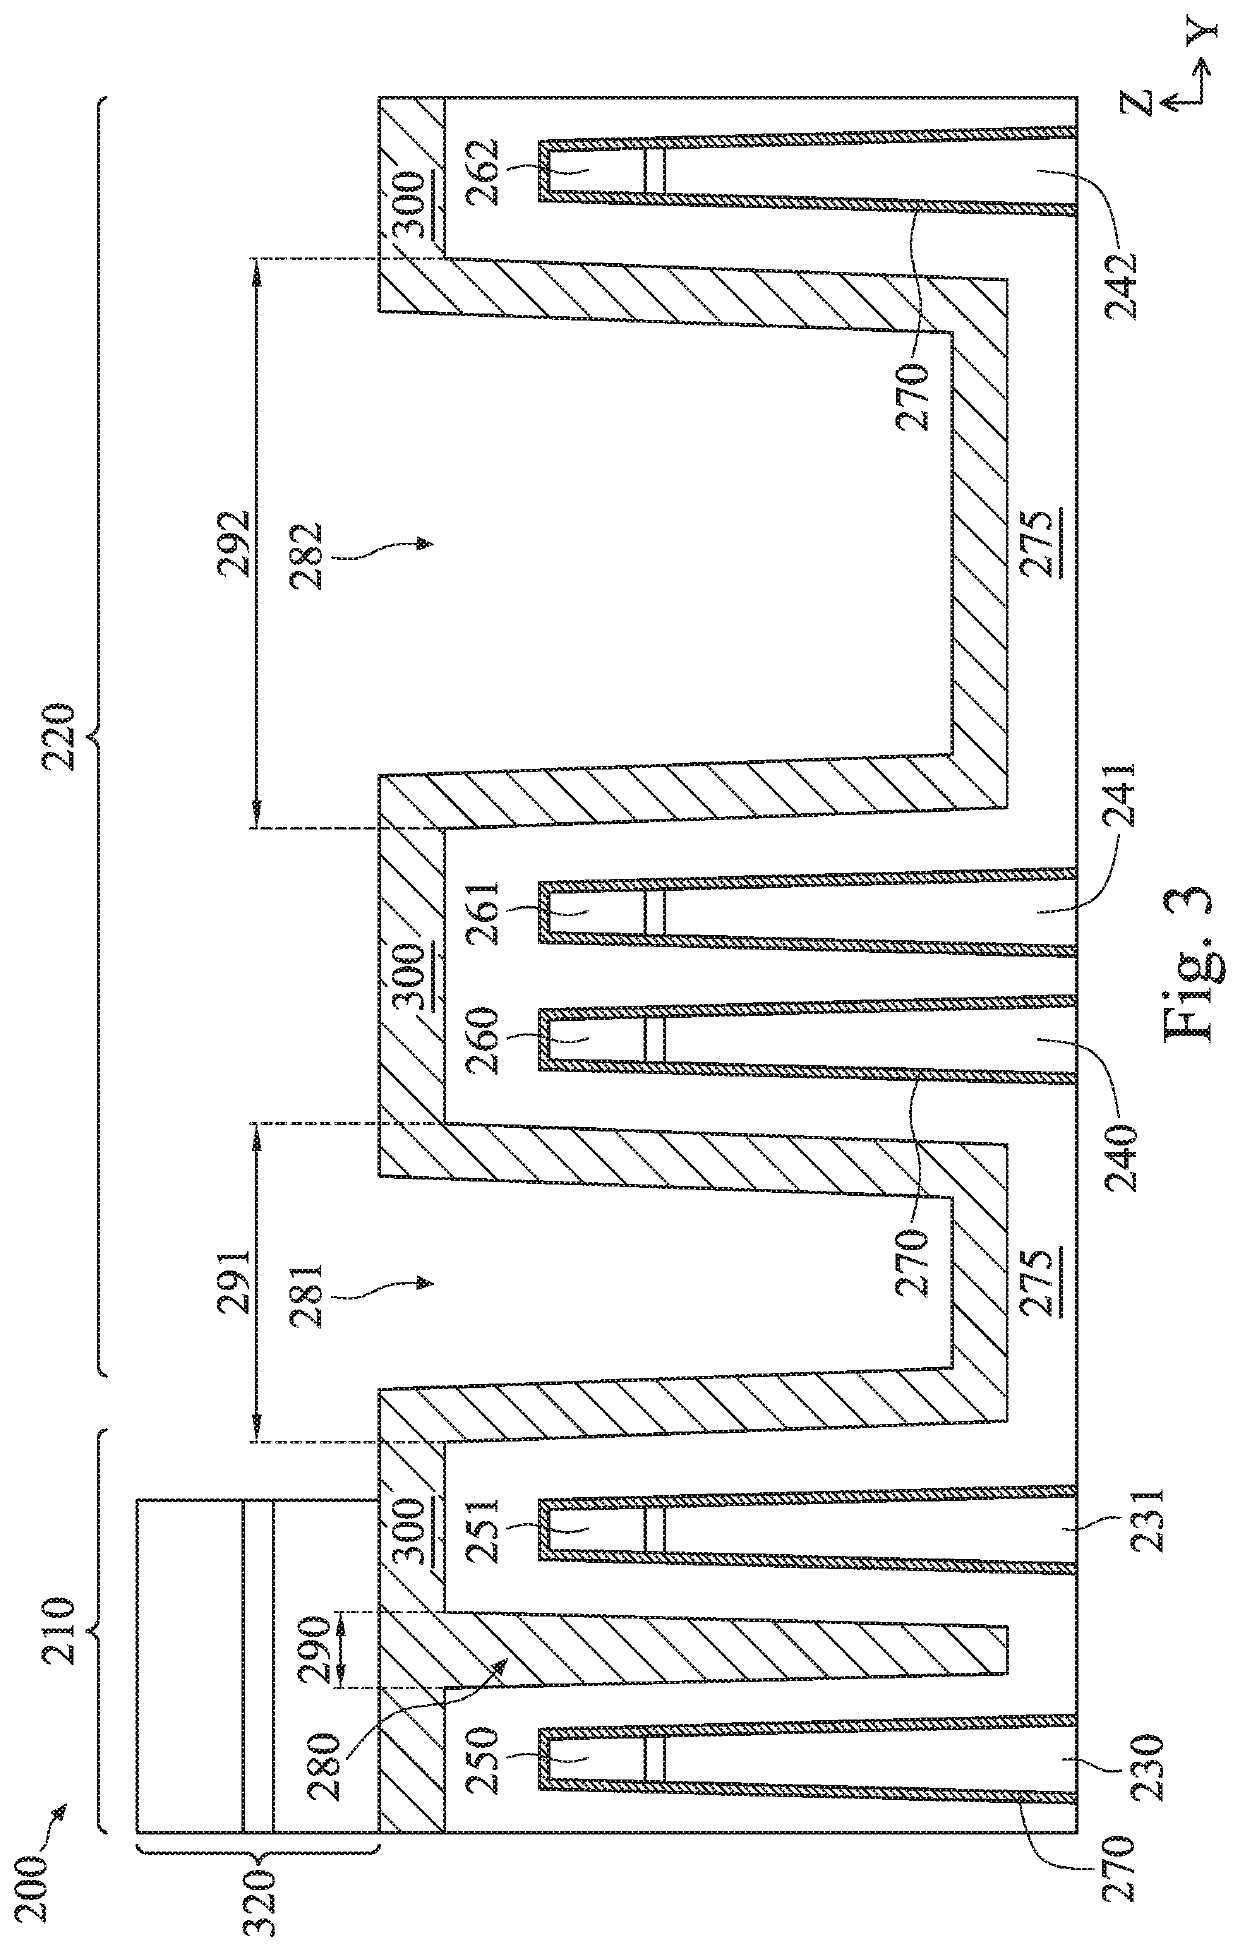 Dielectric Fins With Different Dielectric Constants and Sizes in Different Regions of a Semiconductor Device